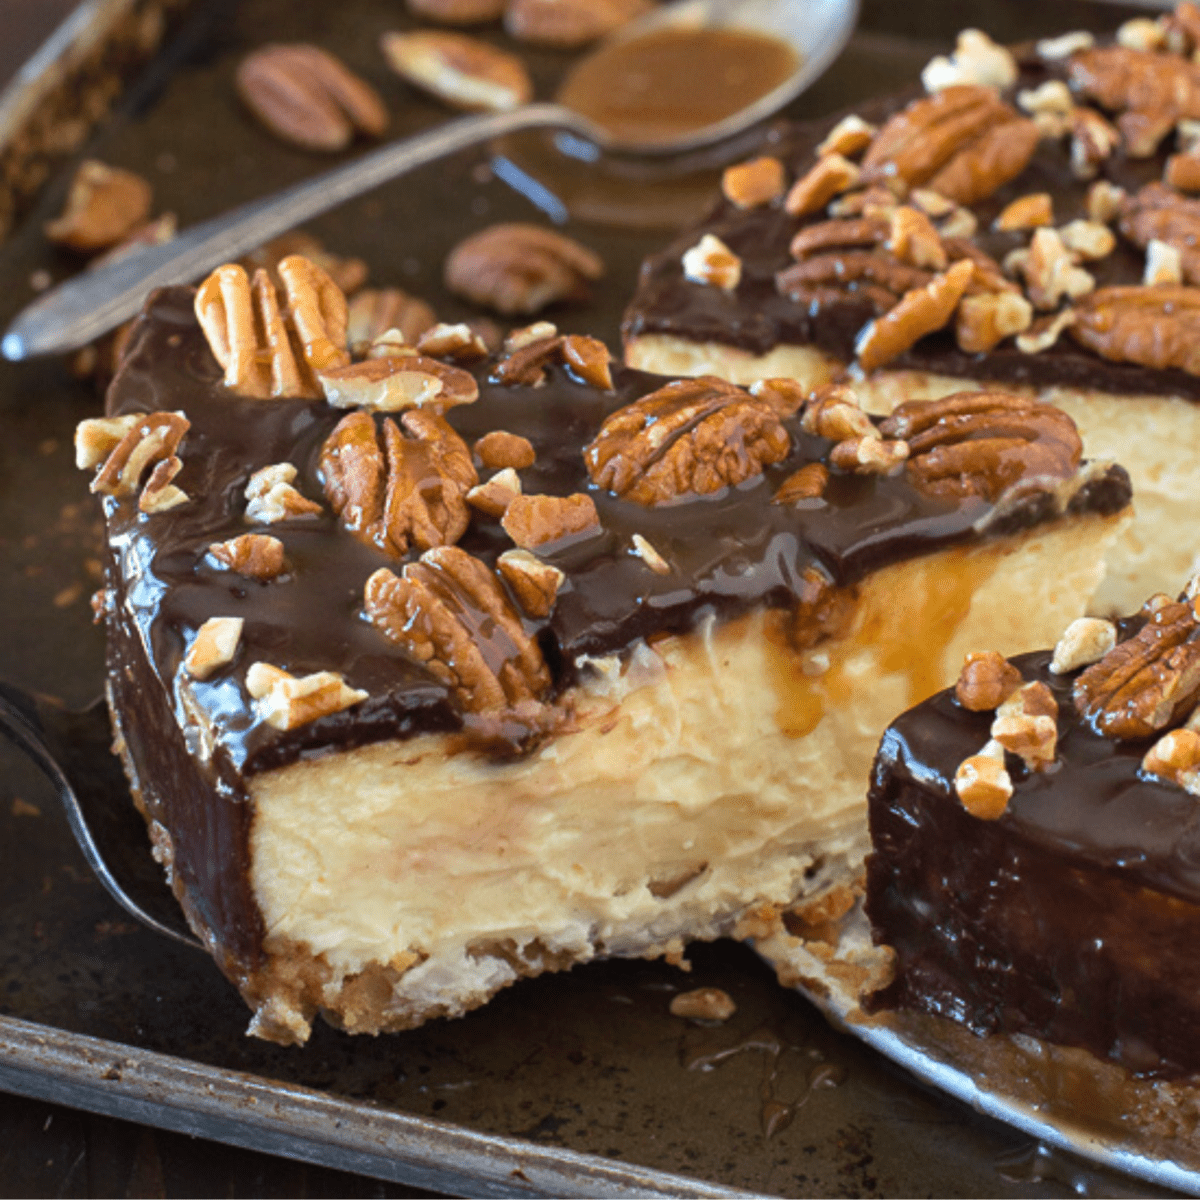 Turtle Cheesecake caramel, chocolate and nuts in cheesecake!